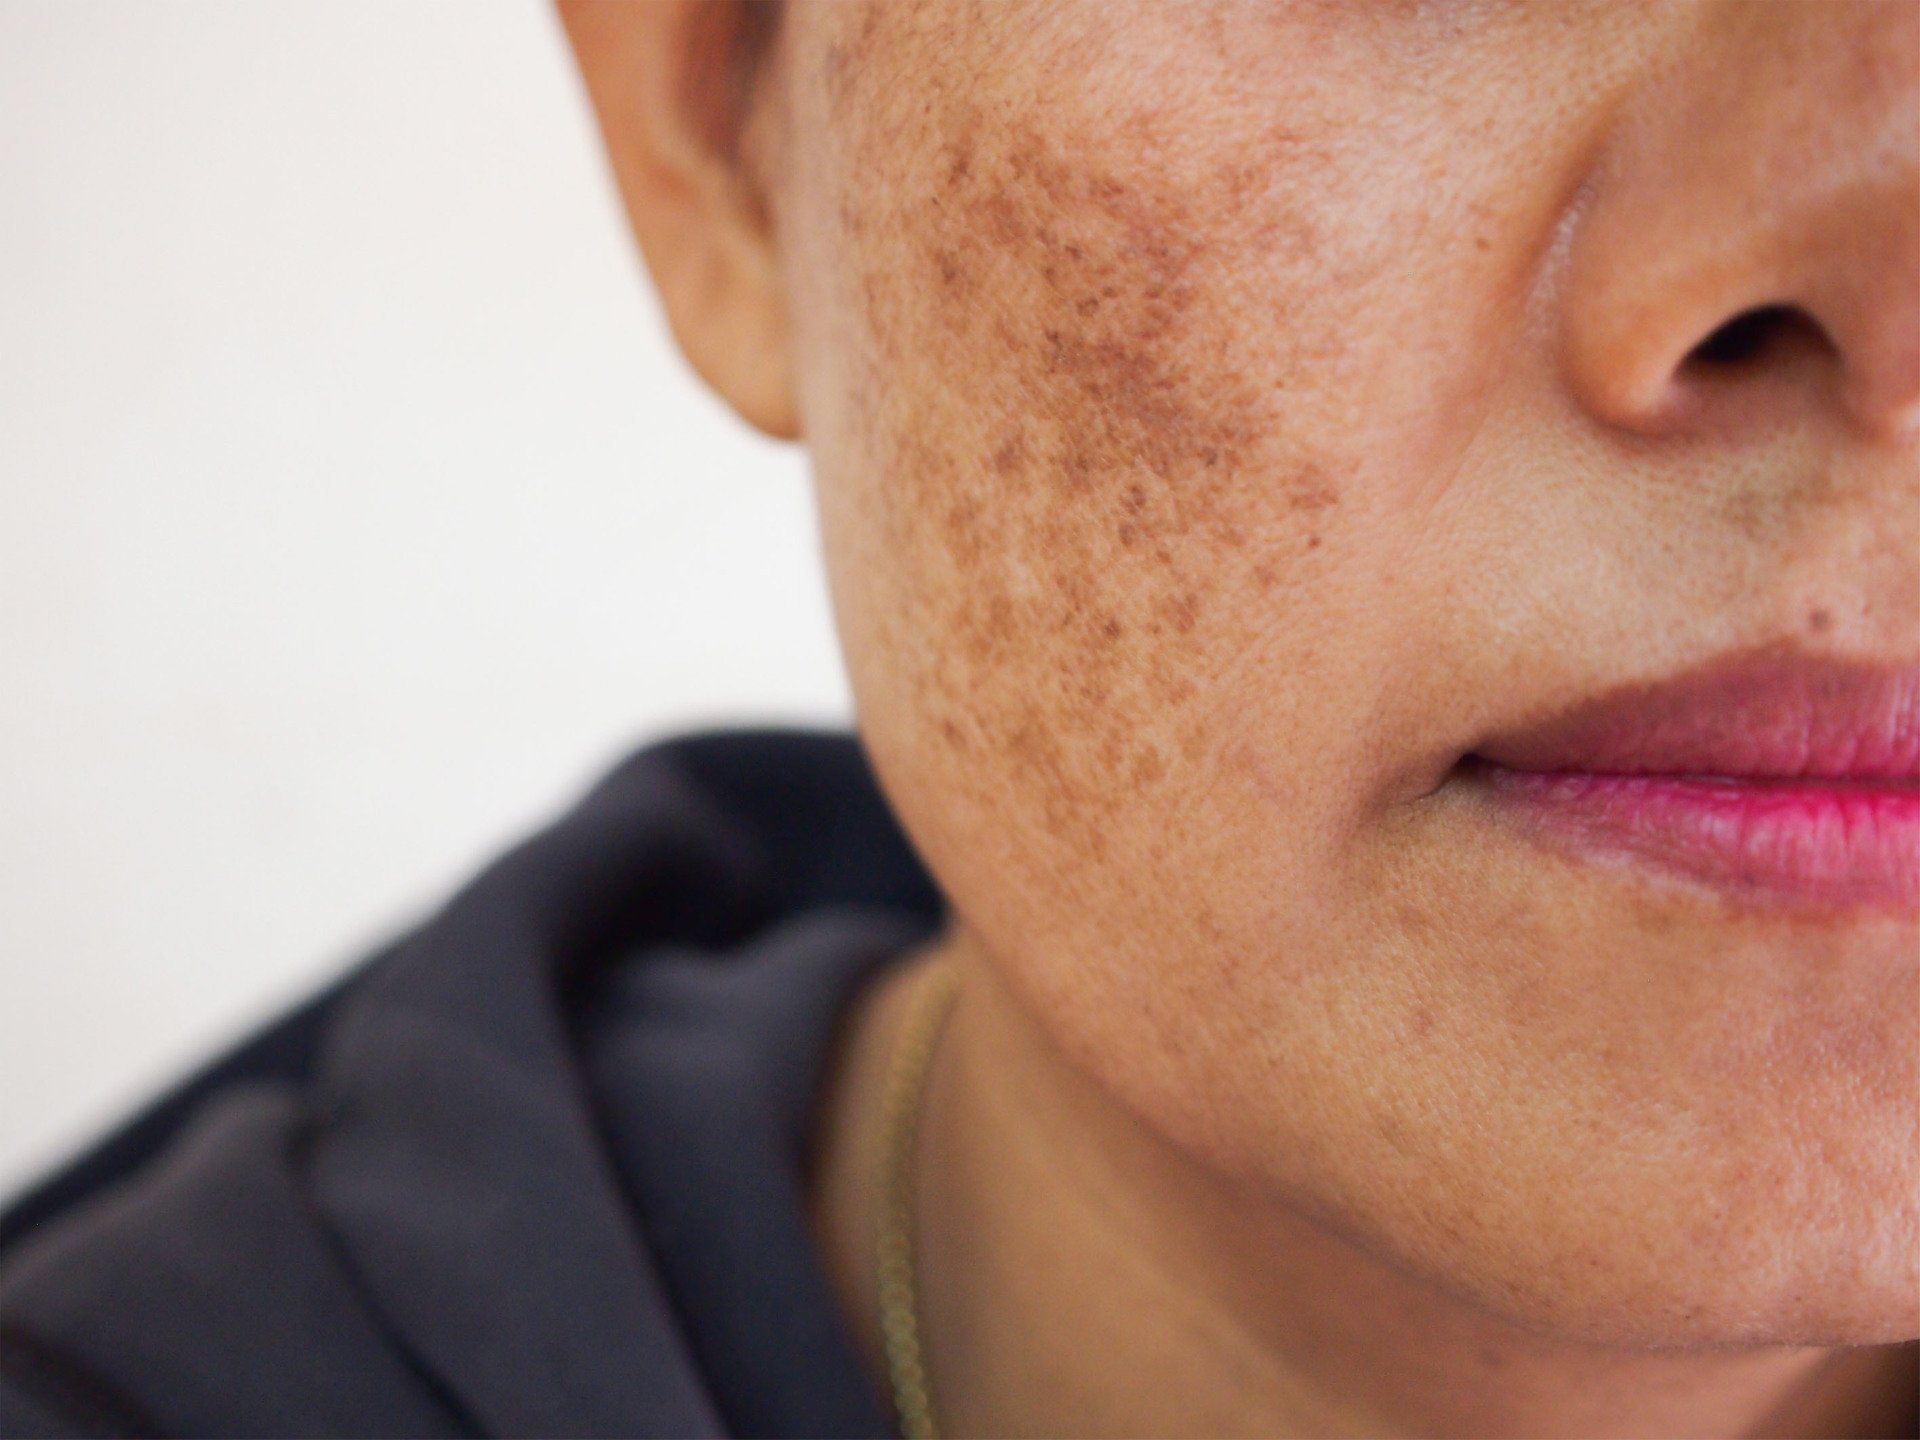 discoloration on a woman's face